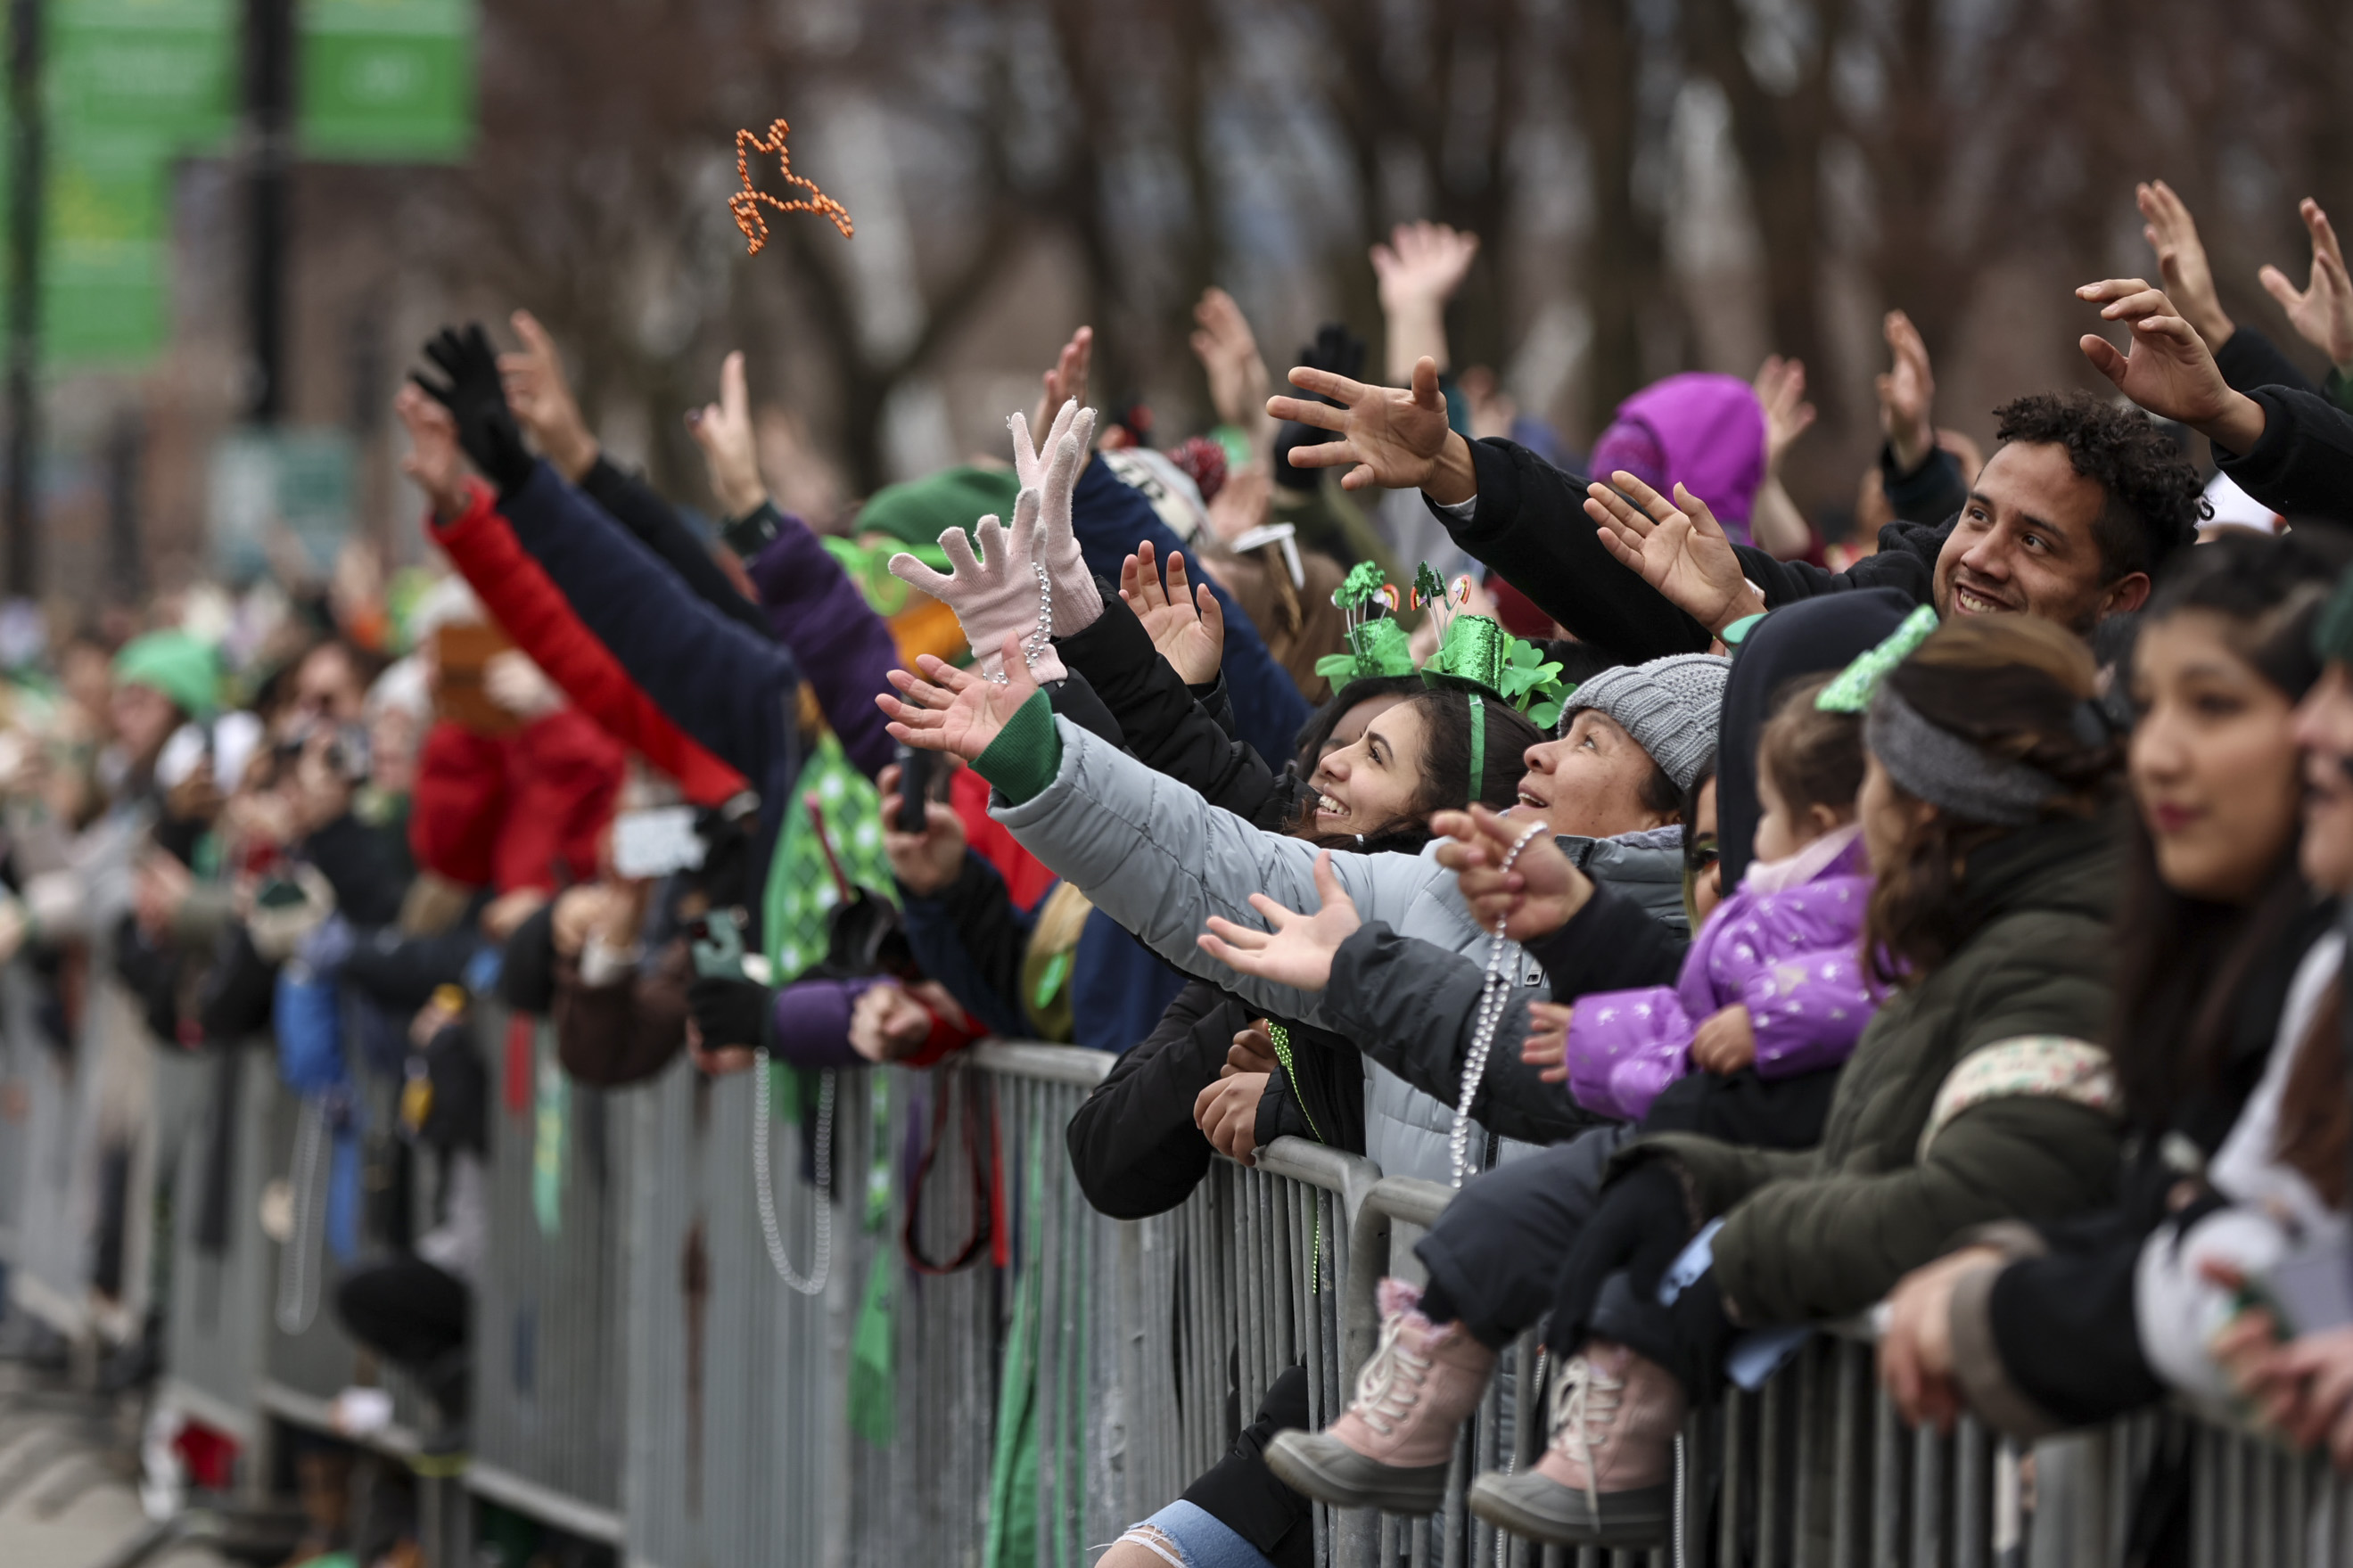 St Patrick's Day in Chicago 2023: How to celebrate